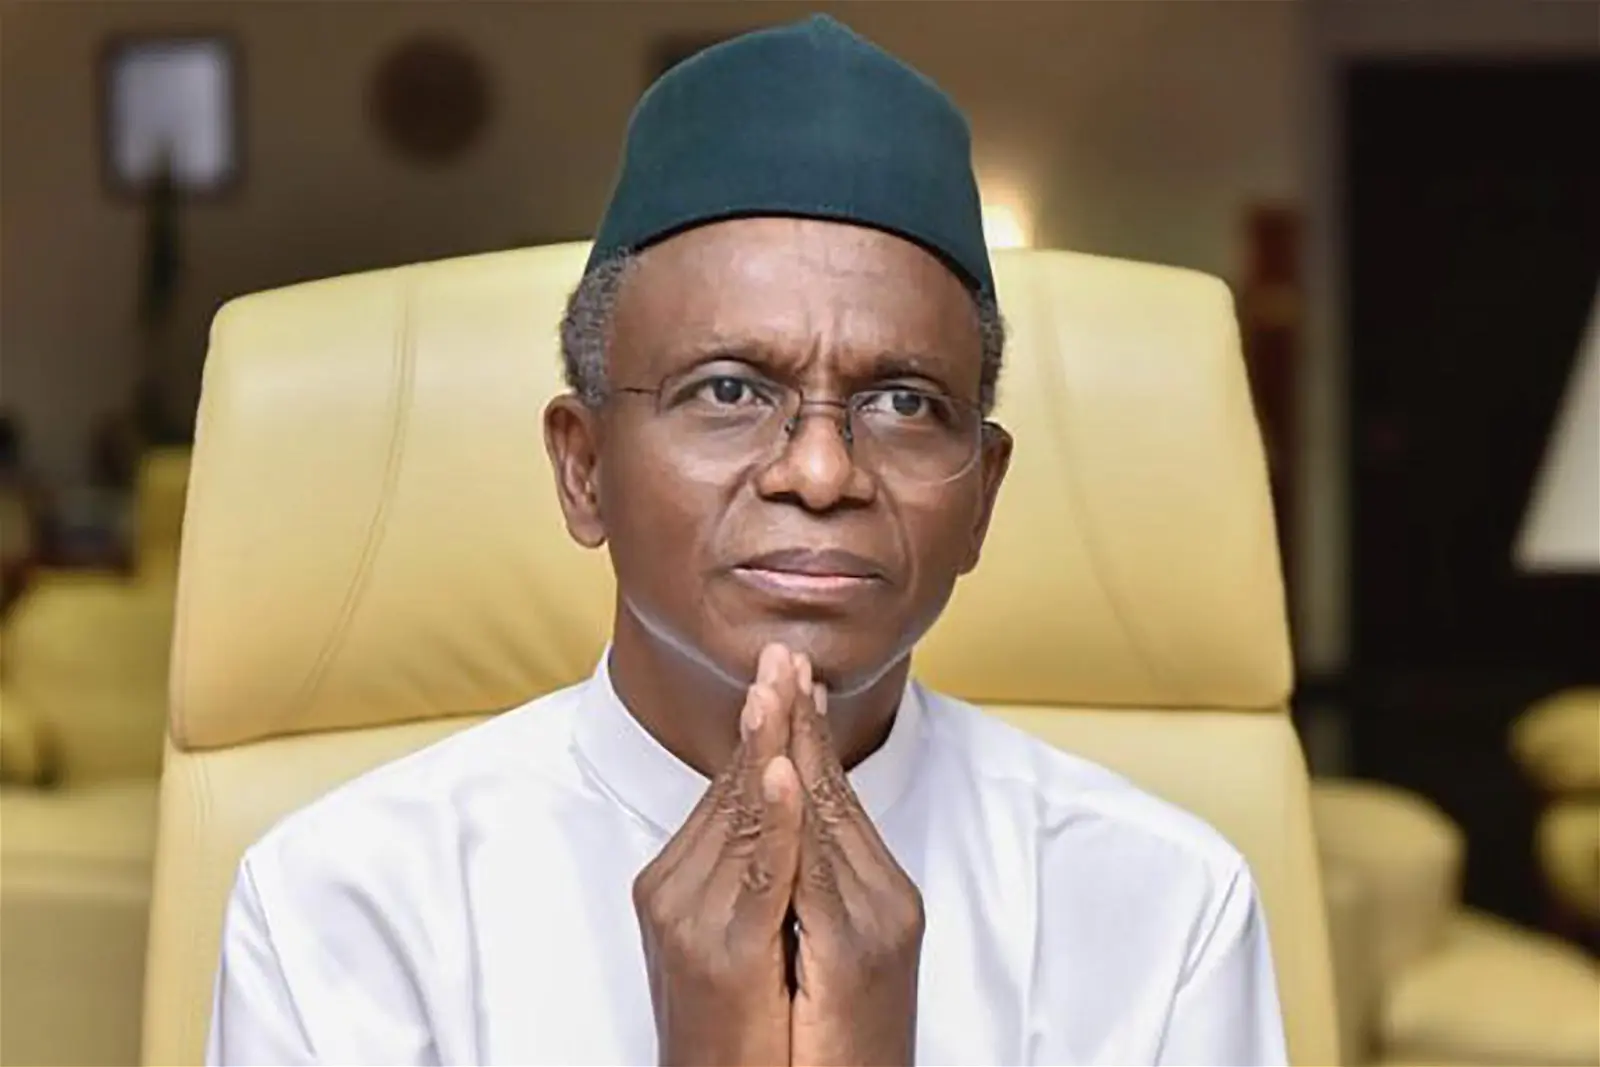 APC Chieftain Sees El-Rufai's Potential SDP Move As Boost For Party's Electoral Chances